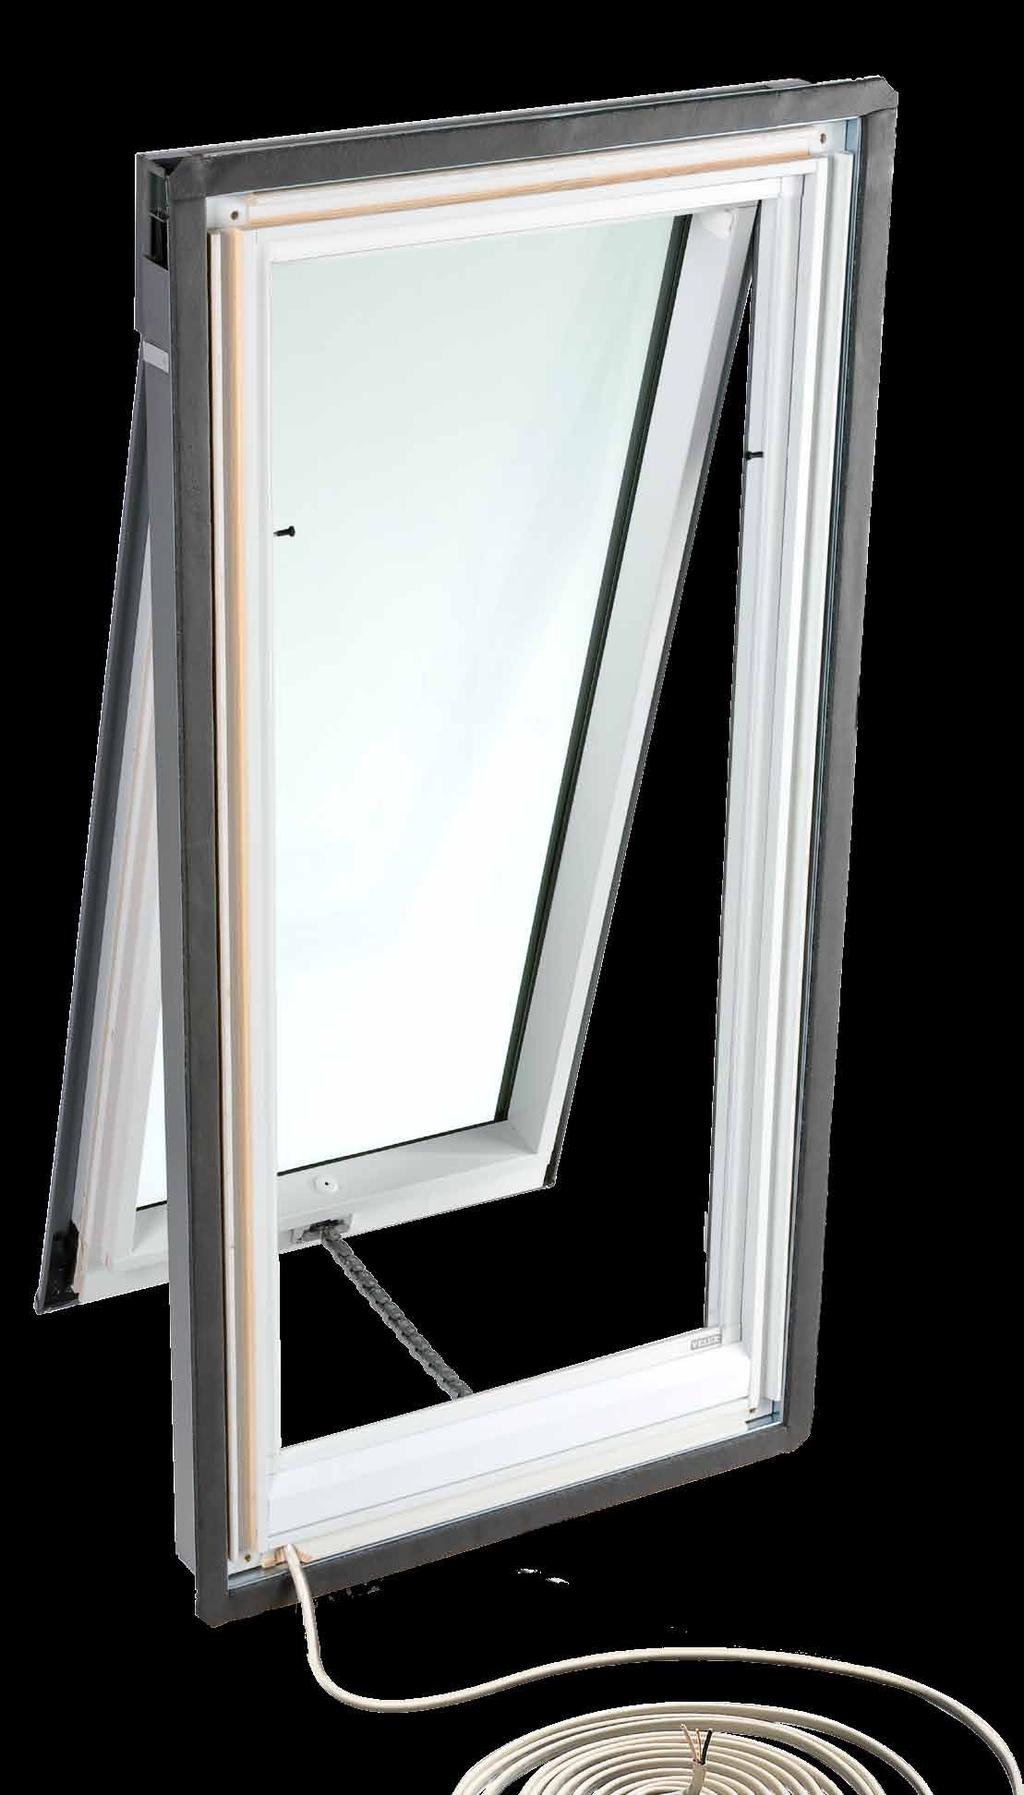 No leak skylight features Models Fixed, Vented and Venting